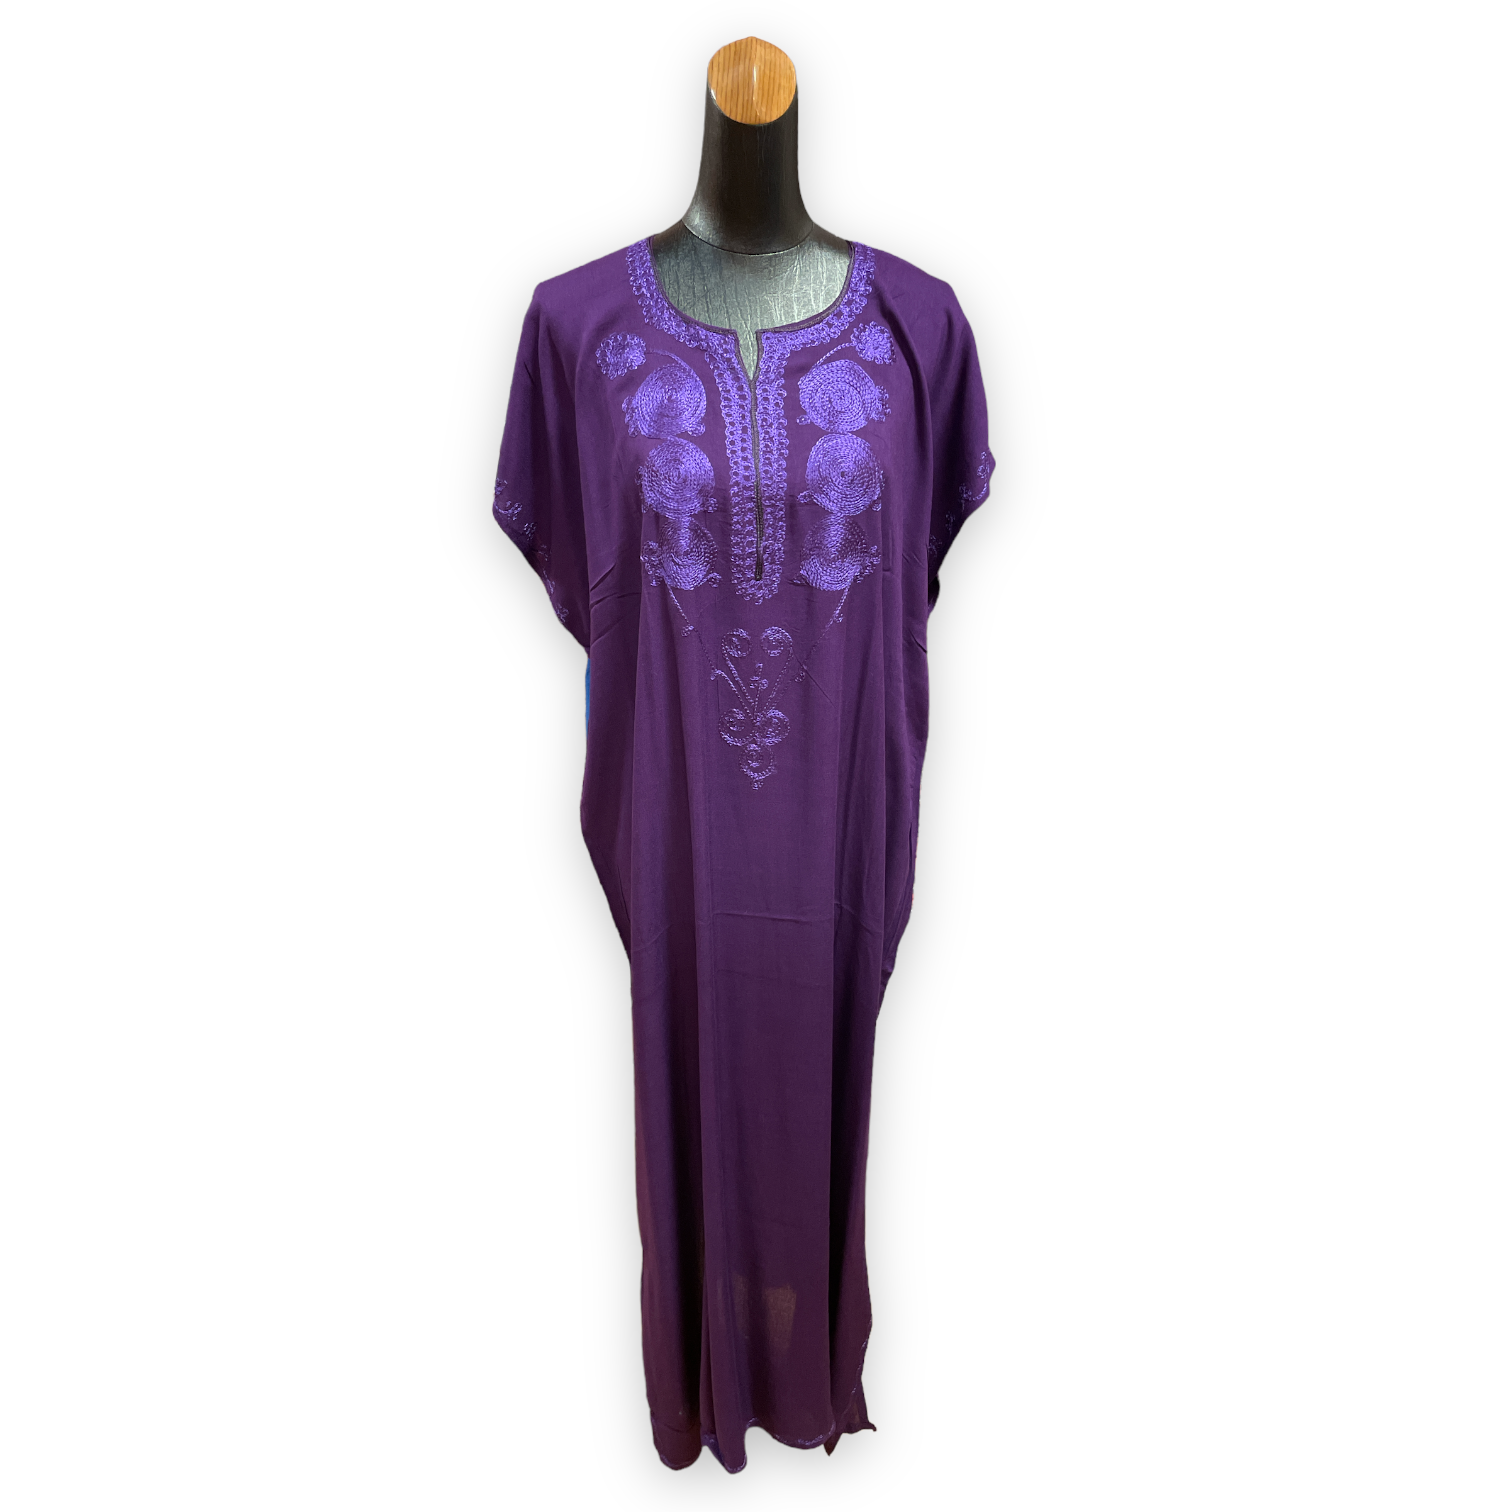 Women's Cotton Budget Friendly Everyday Floral Caftans